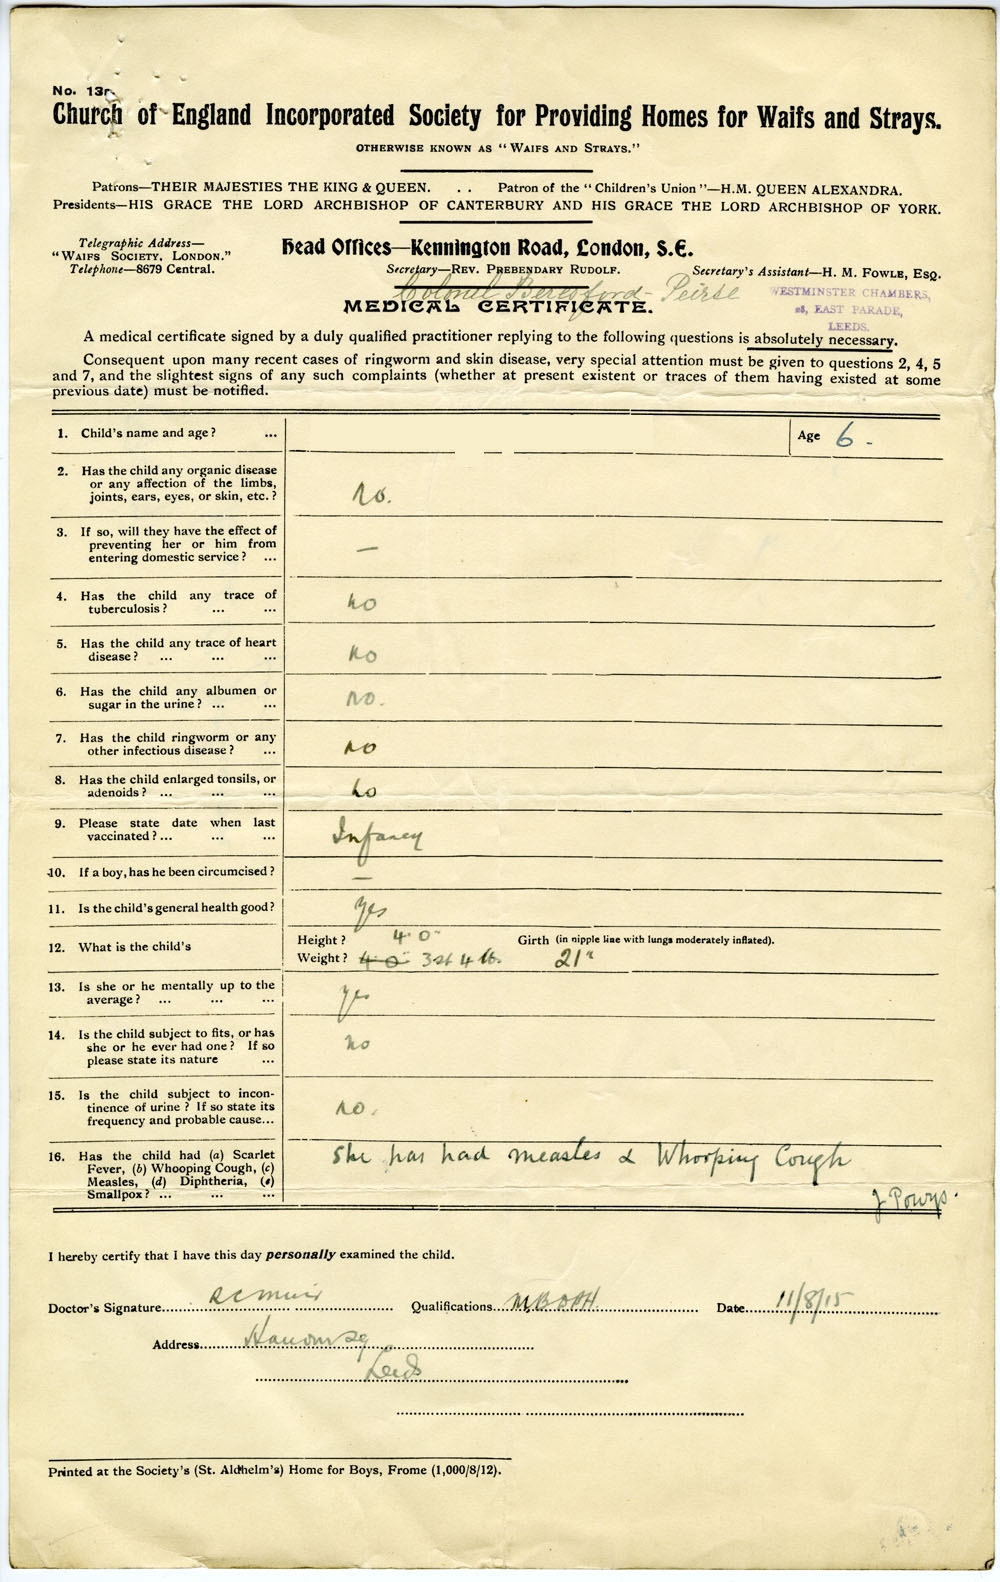 Detailed medical form from case file 19917